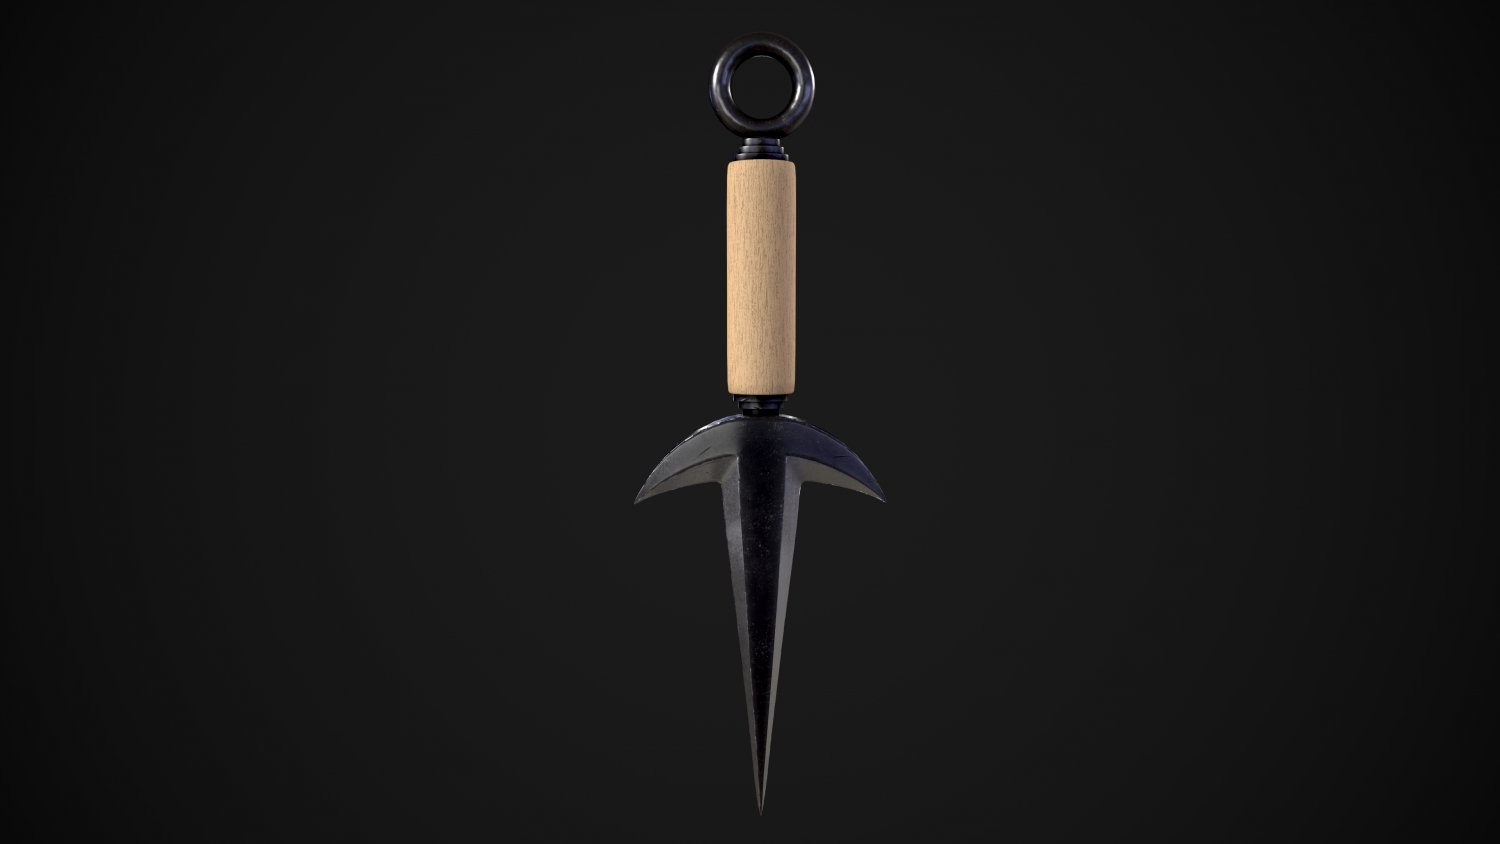 Shark Knife - 3D Model by CosplayItemsRock